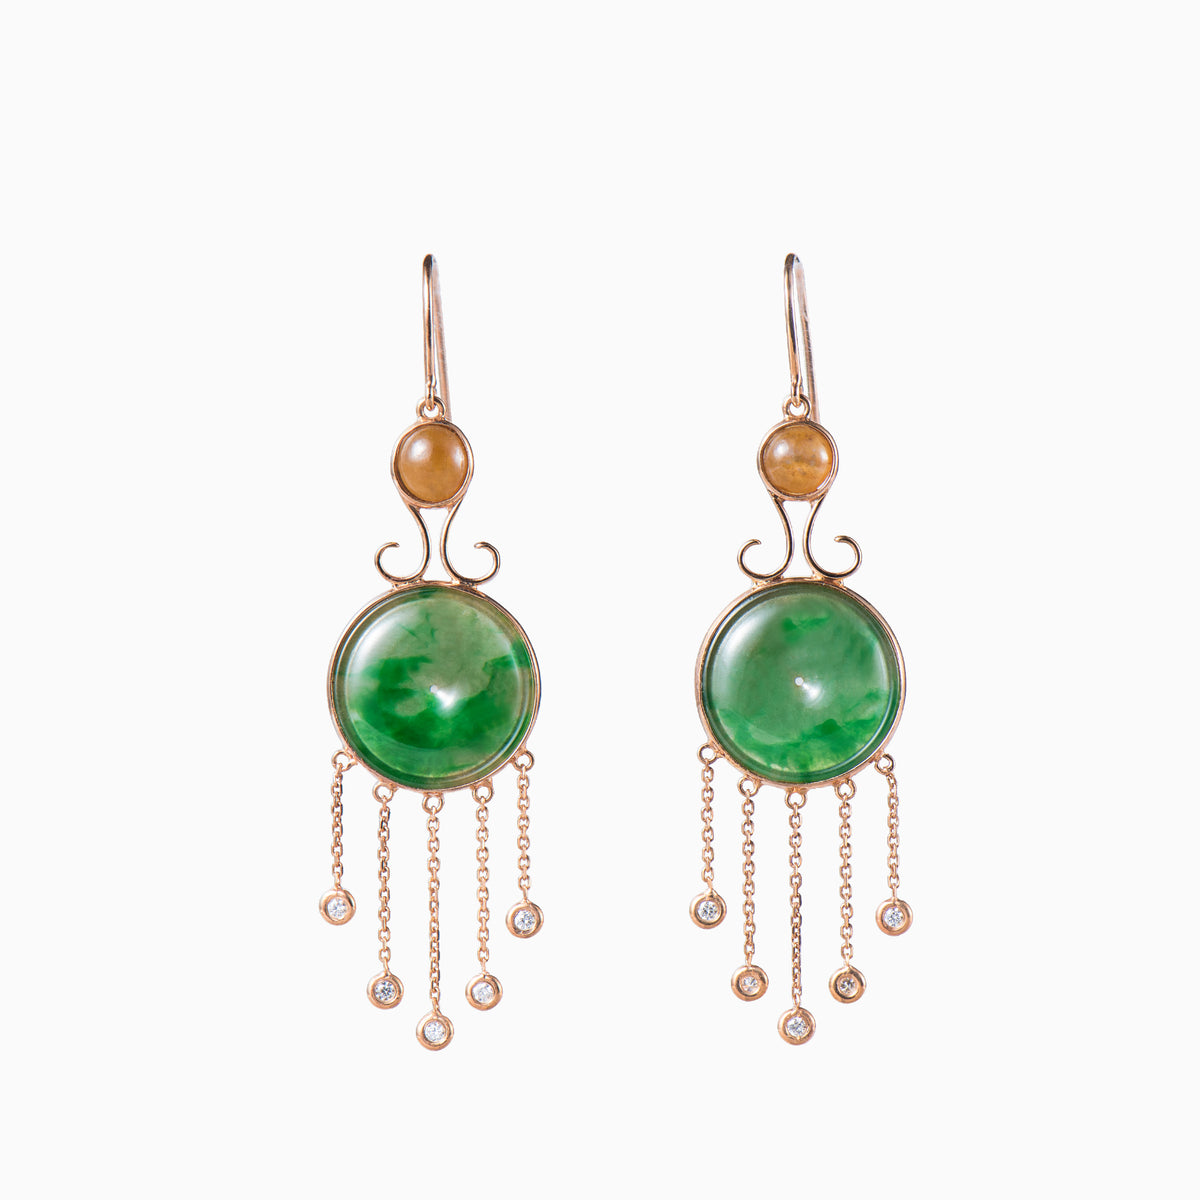 Modern chinese green jade drop earrings with red jade and diamonds a perfect jade gift